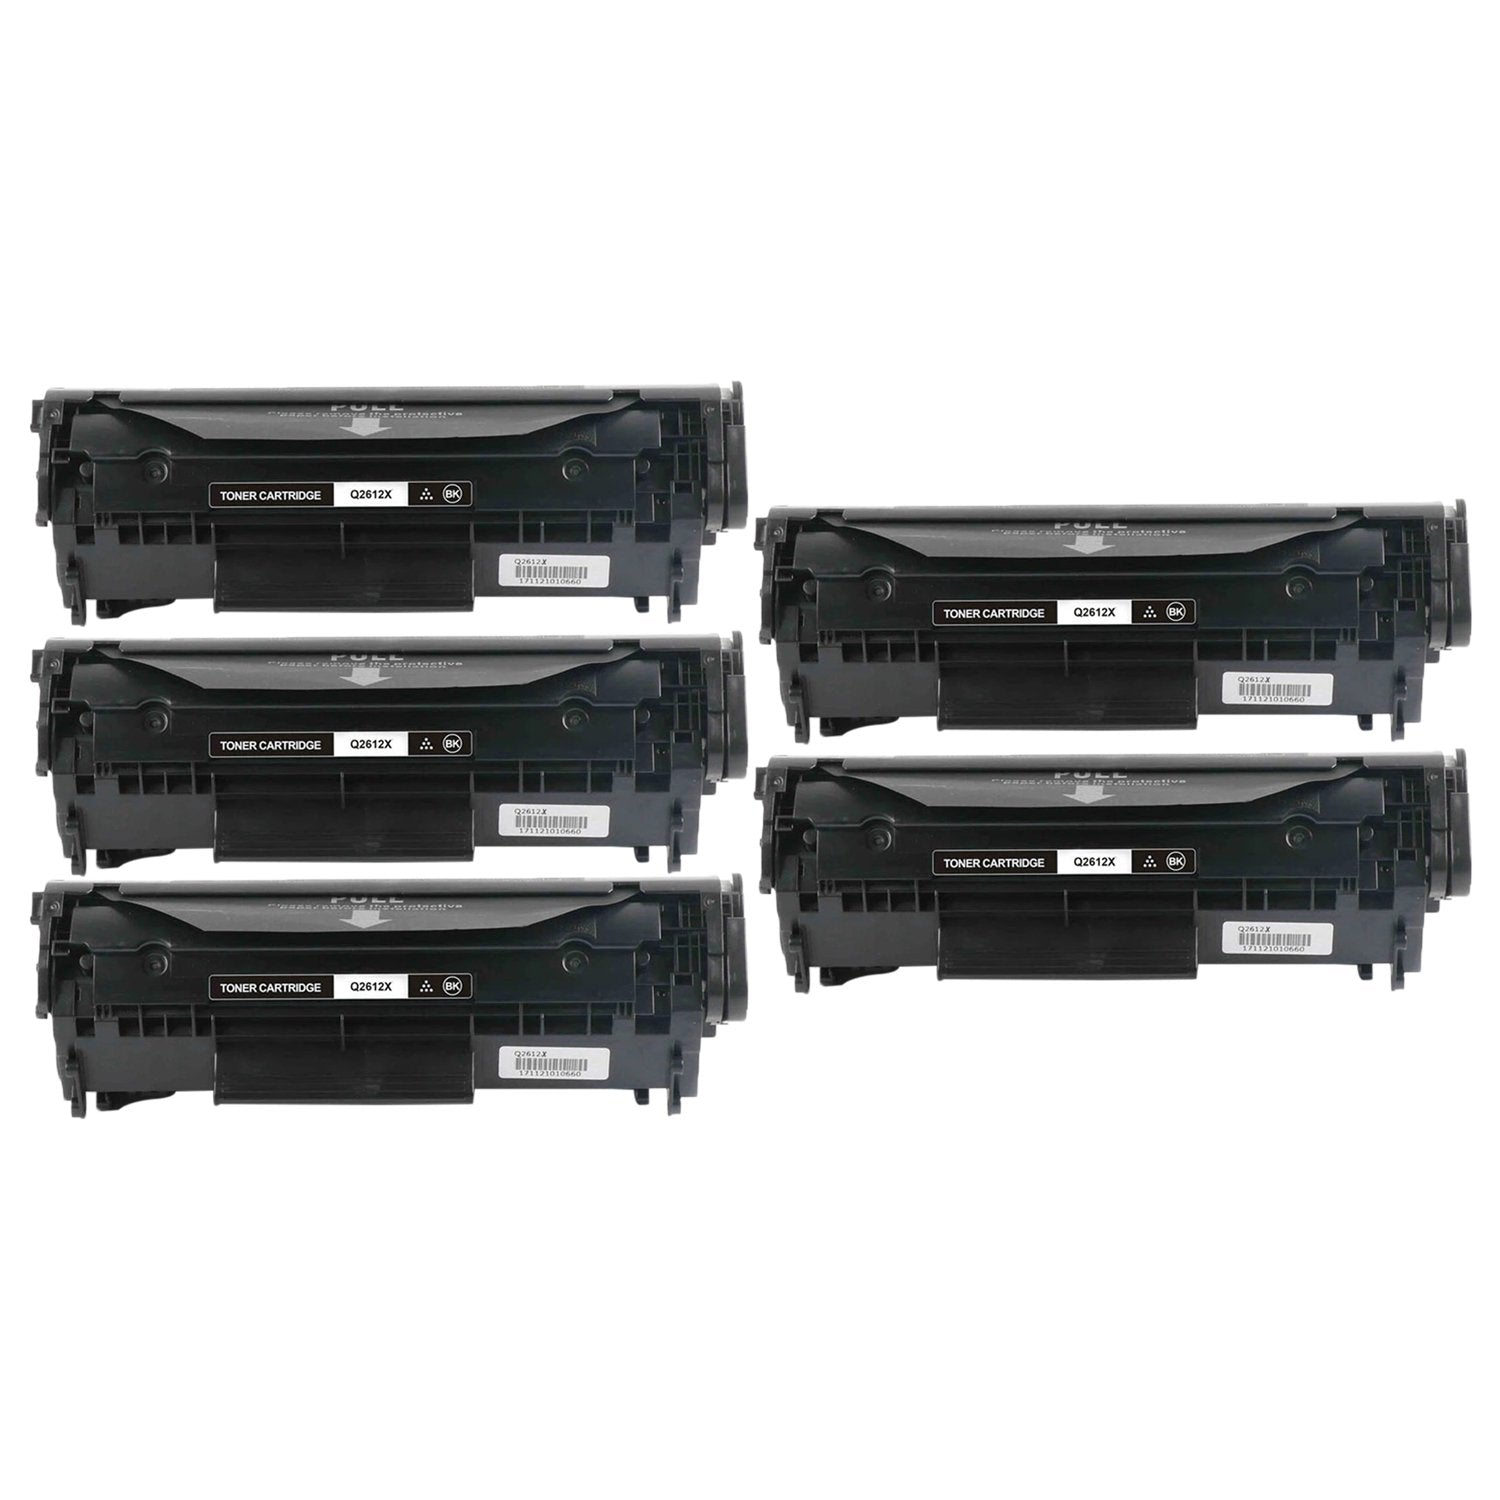 Absolute Toner Compatible Q2612X HP 12X High Yield Black Toner Cartridge | Absolute Toner HP Toner Cartridges